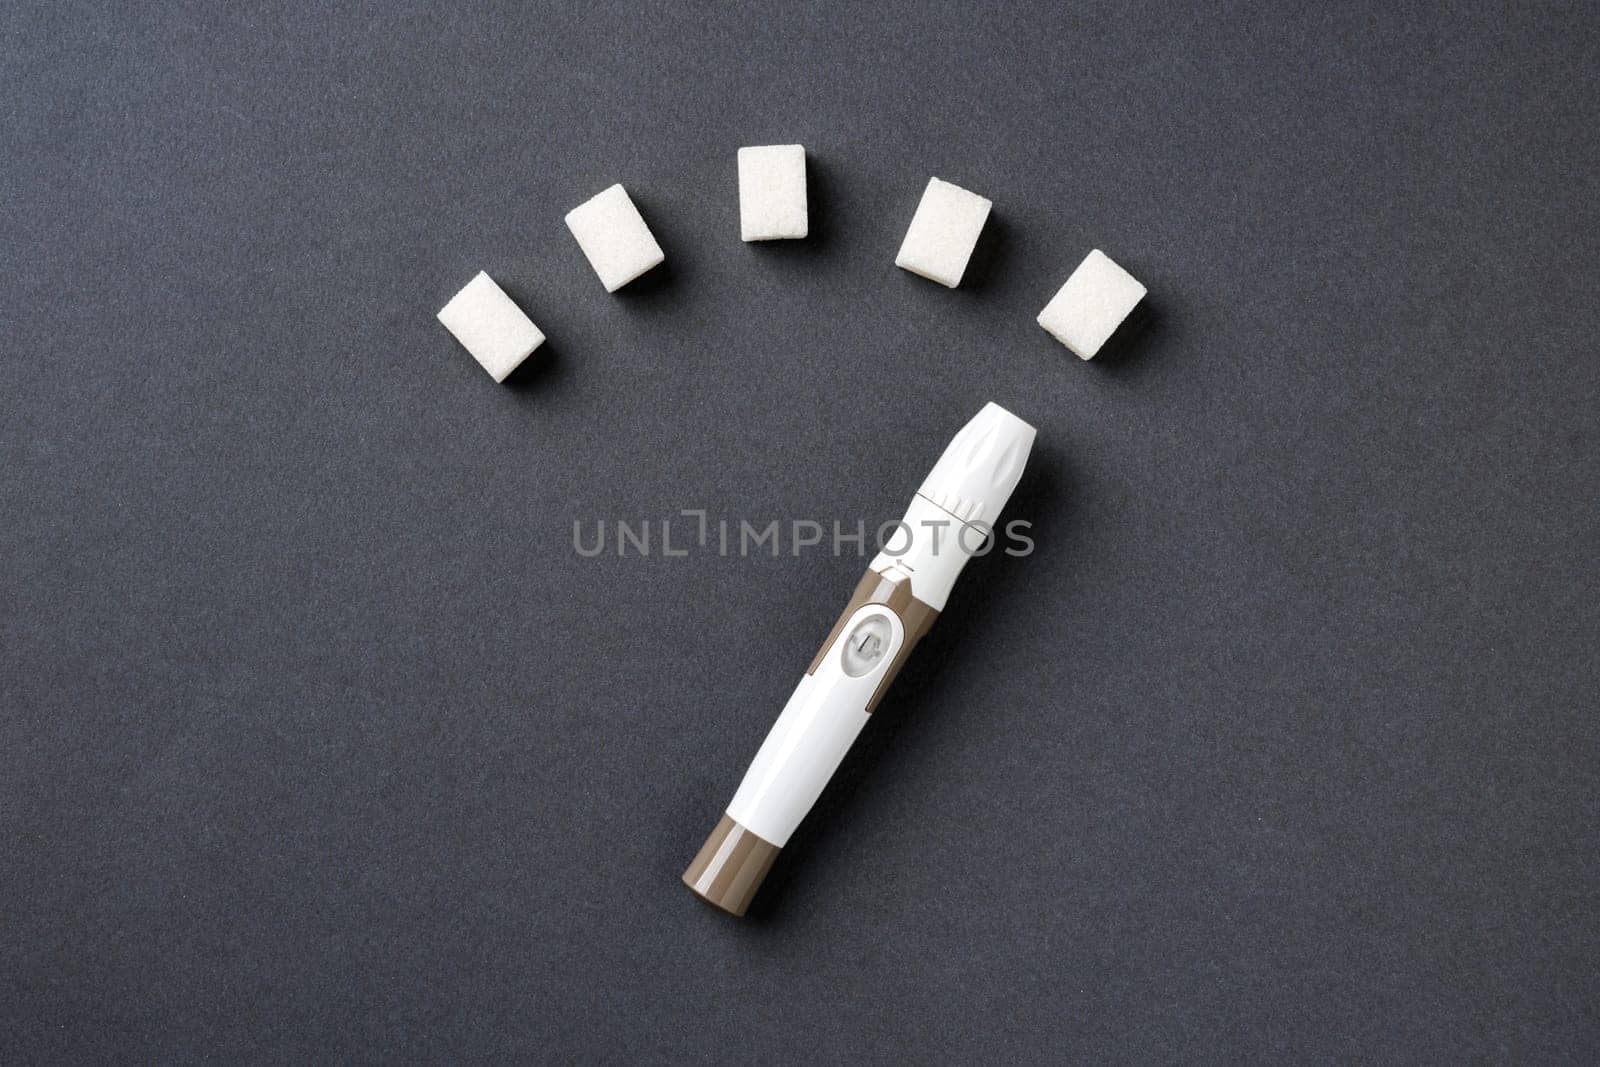 Blood sugar level displayed with sugar cubes and a lancet pen on a dark background by Sonat